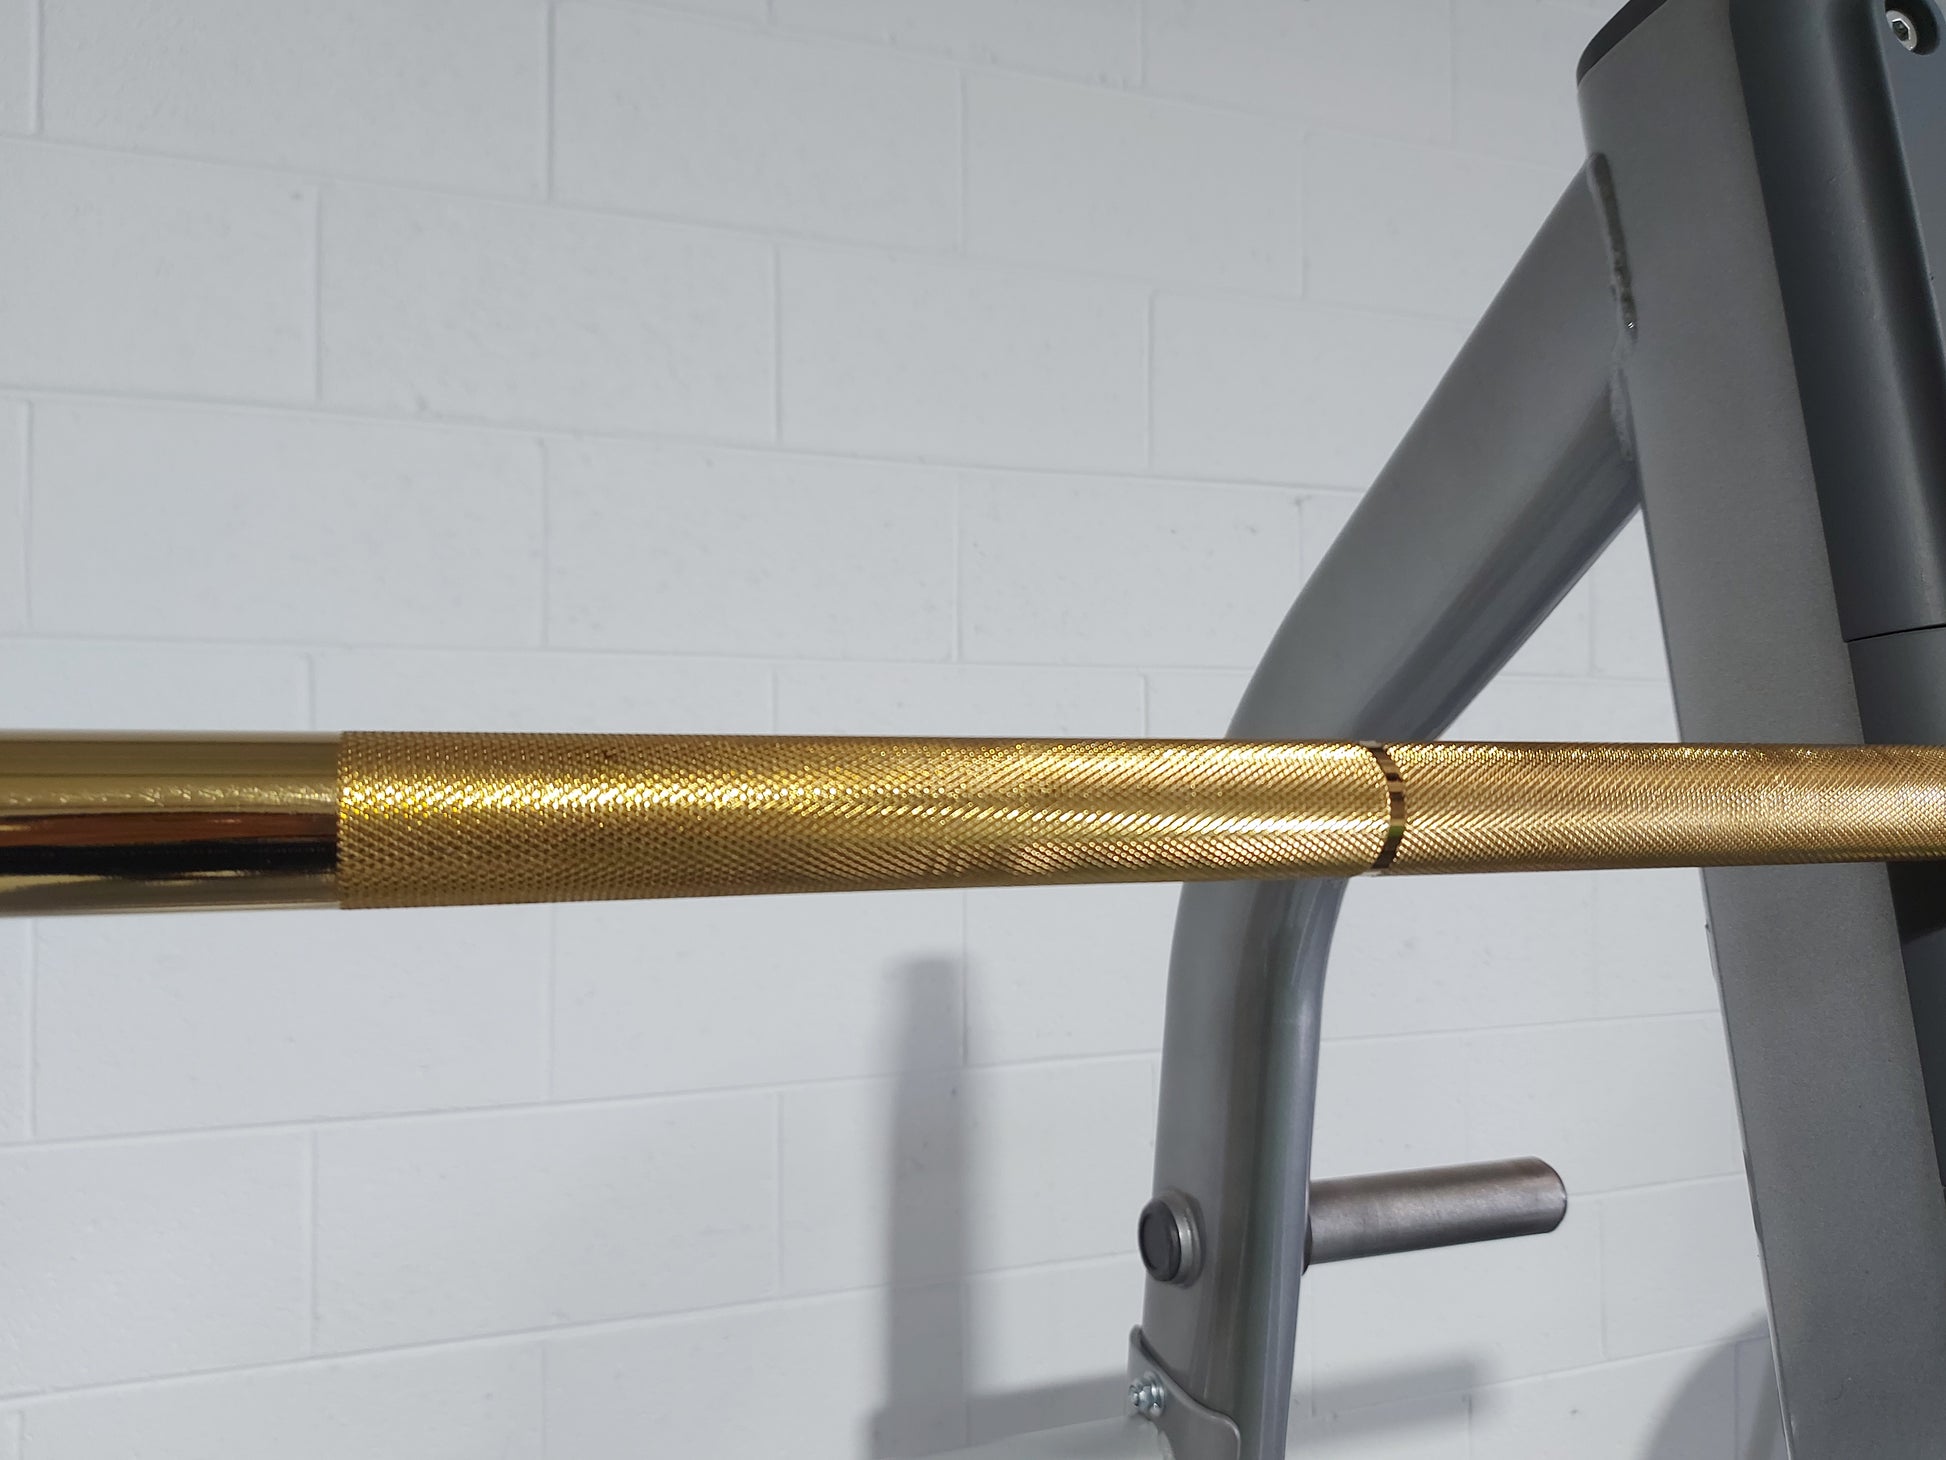 AltraBody-Gold-7ft-20KG-Olympic-Barbell-1500lb-rating-4